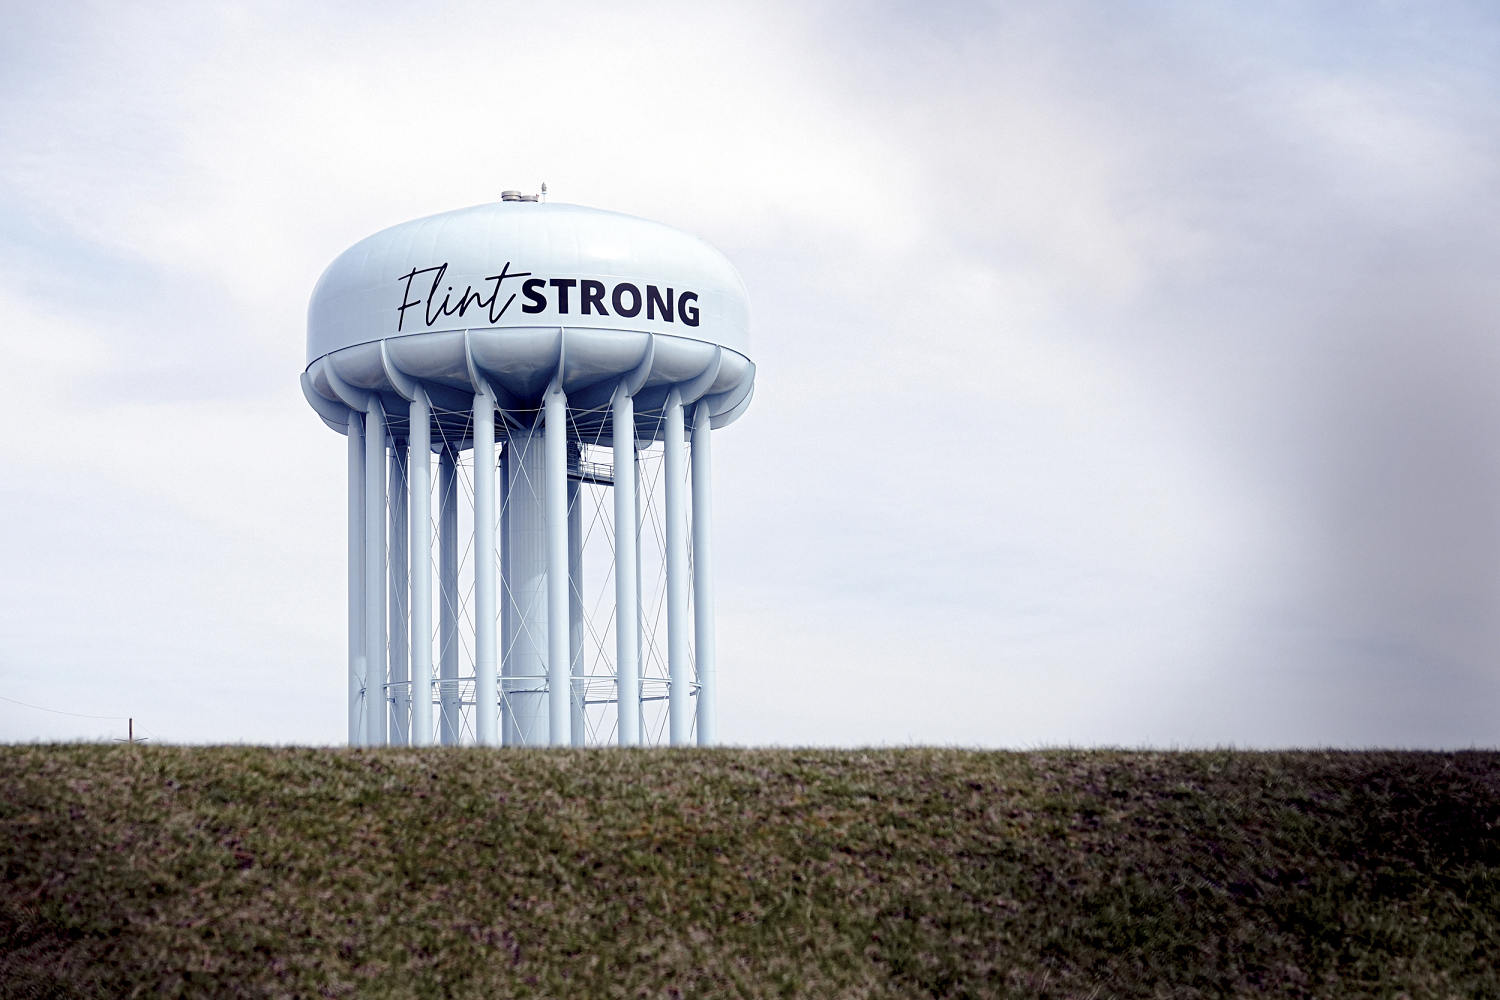 10 years after Flint's lead water crisis was discovered, a lack of urgency stalls 'proper justice'